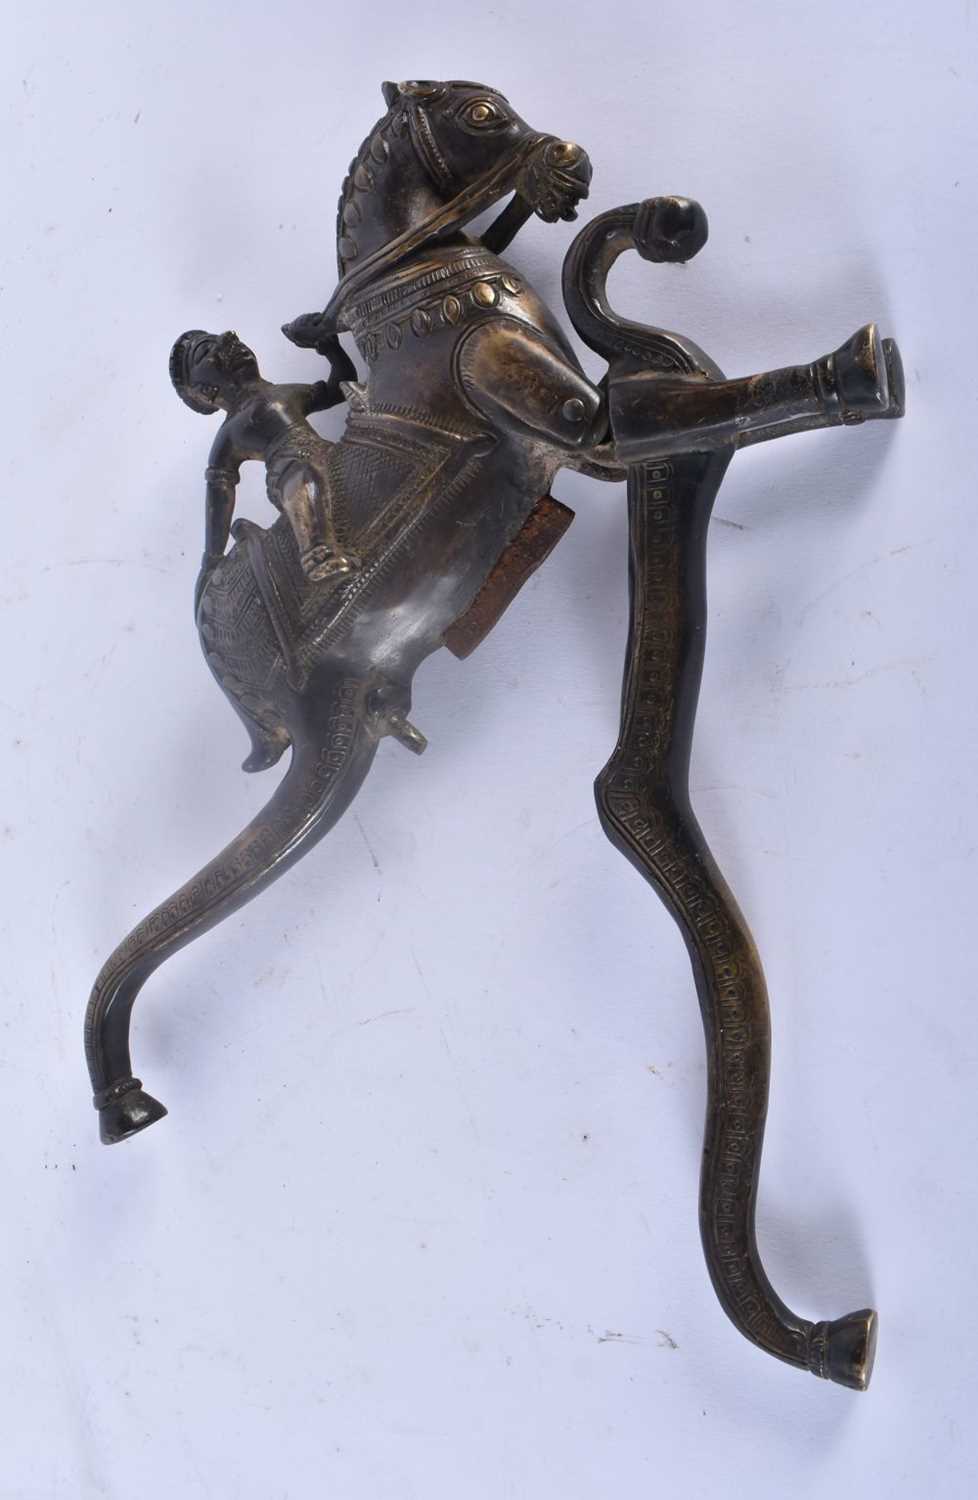 A VERY UNUSUAL LARGE 18TH/19TH CENTURY MIDDLE EASTERN INDIAN BRONZE BEETLE NUT CRACKER modelled as a - Image 3 of 4